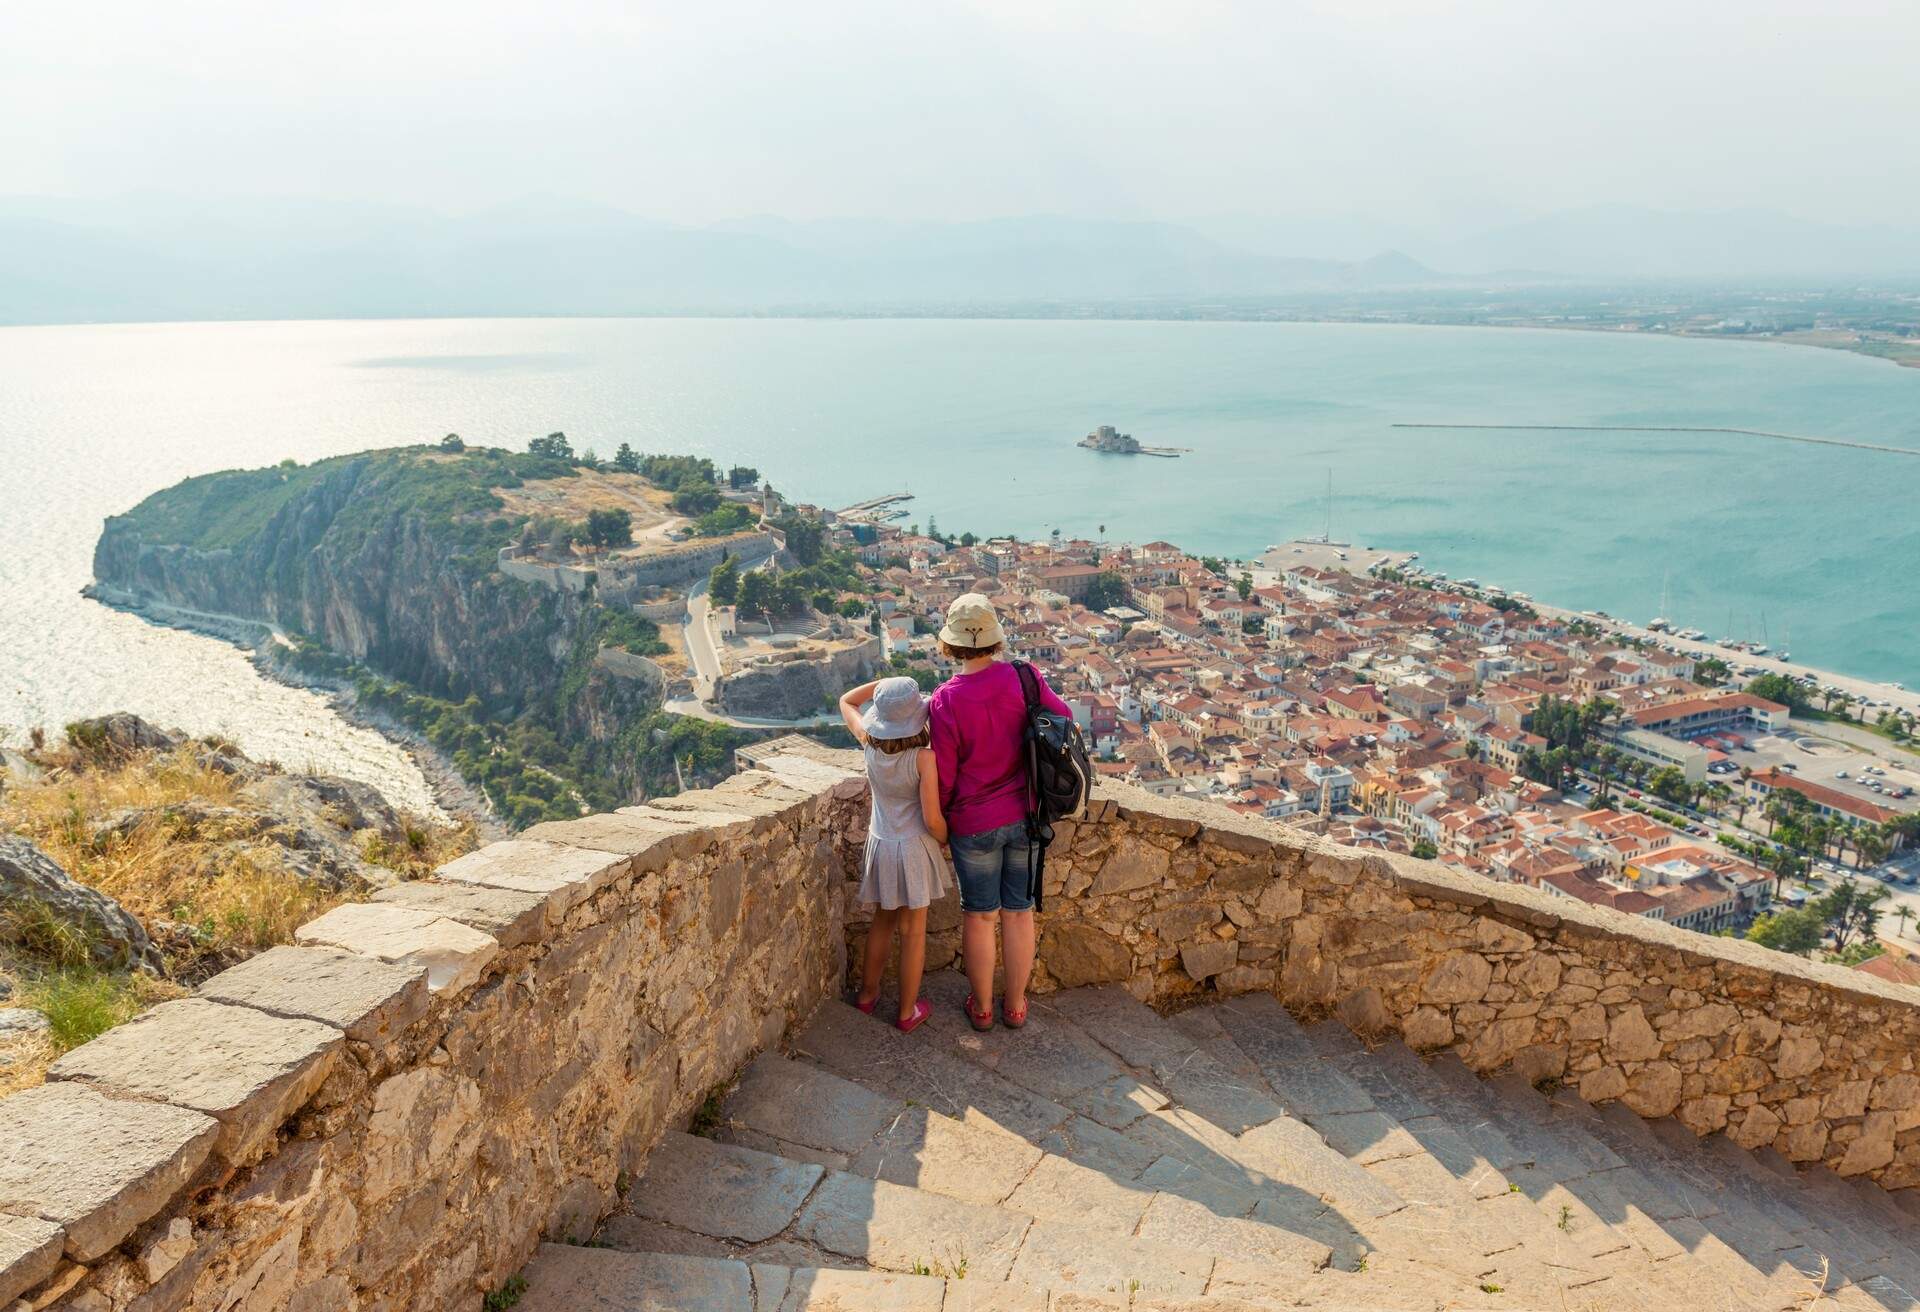 dest_greece_nafplio_people_mother_daughter_gettyimages-1158059159_universal_within-usage-period_99828.jpg